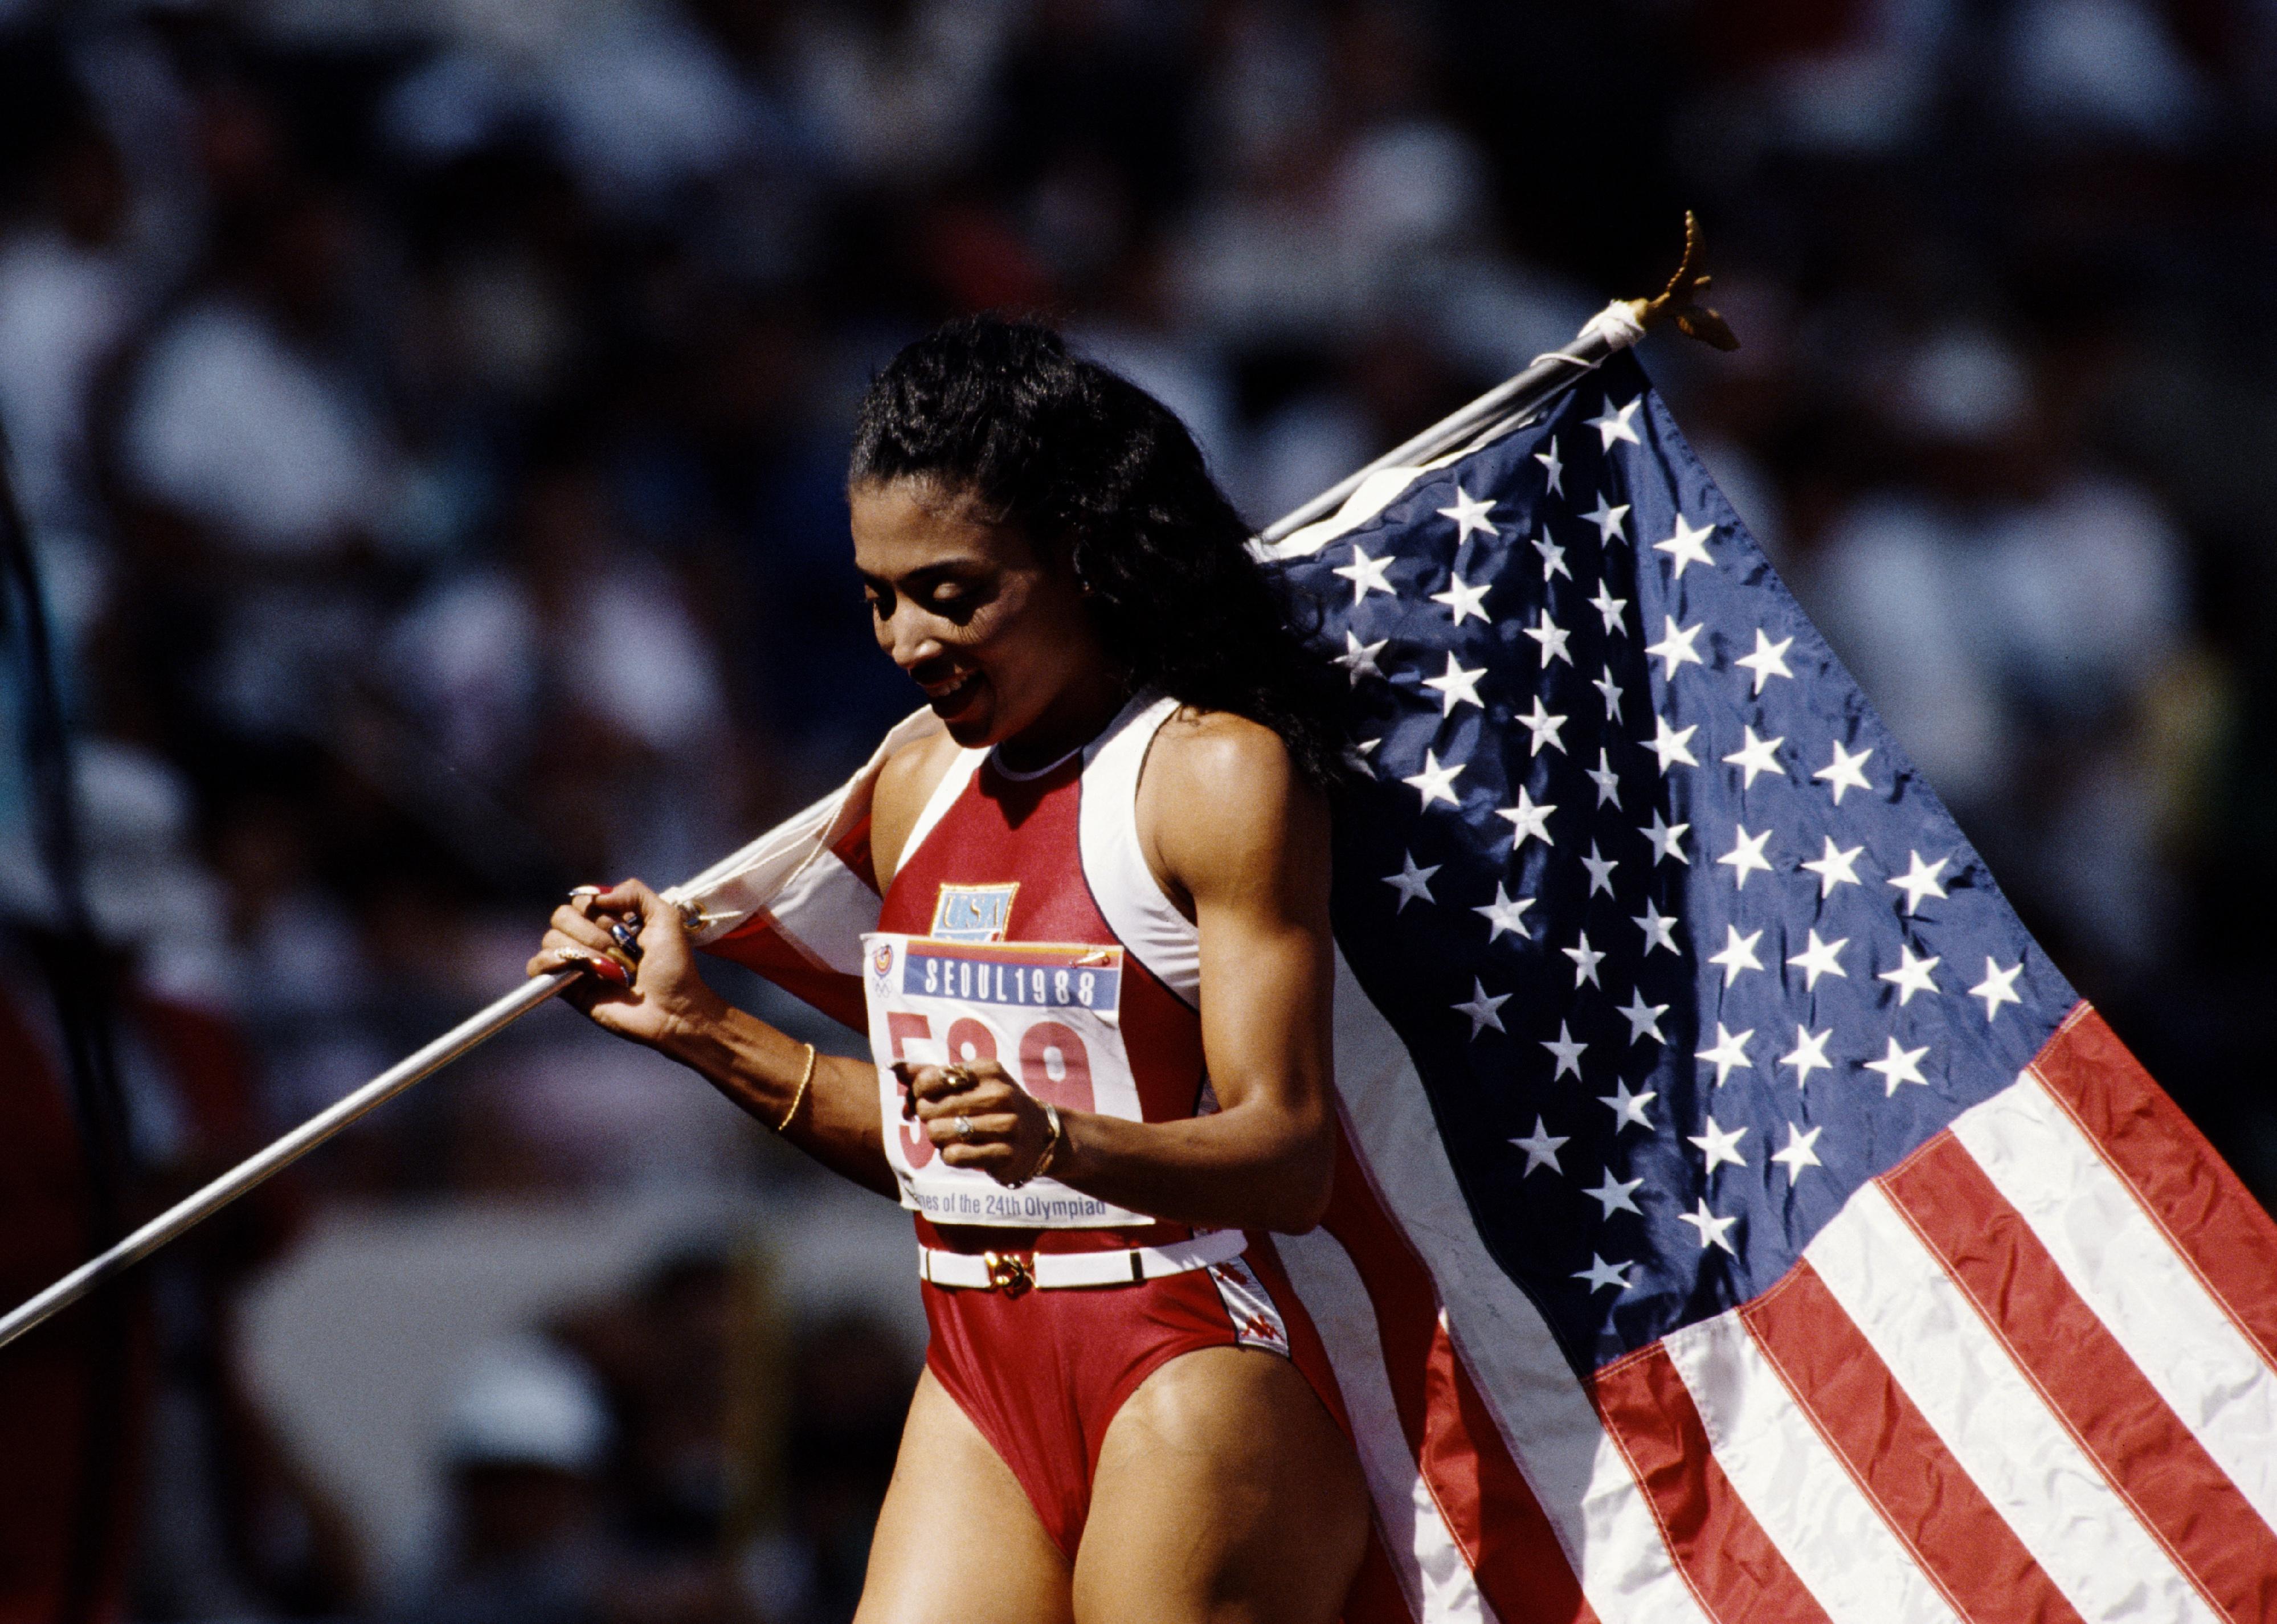 Black History Month: Athletes who were champions of the culture